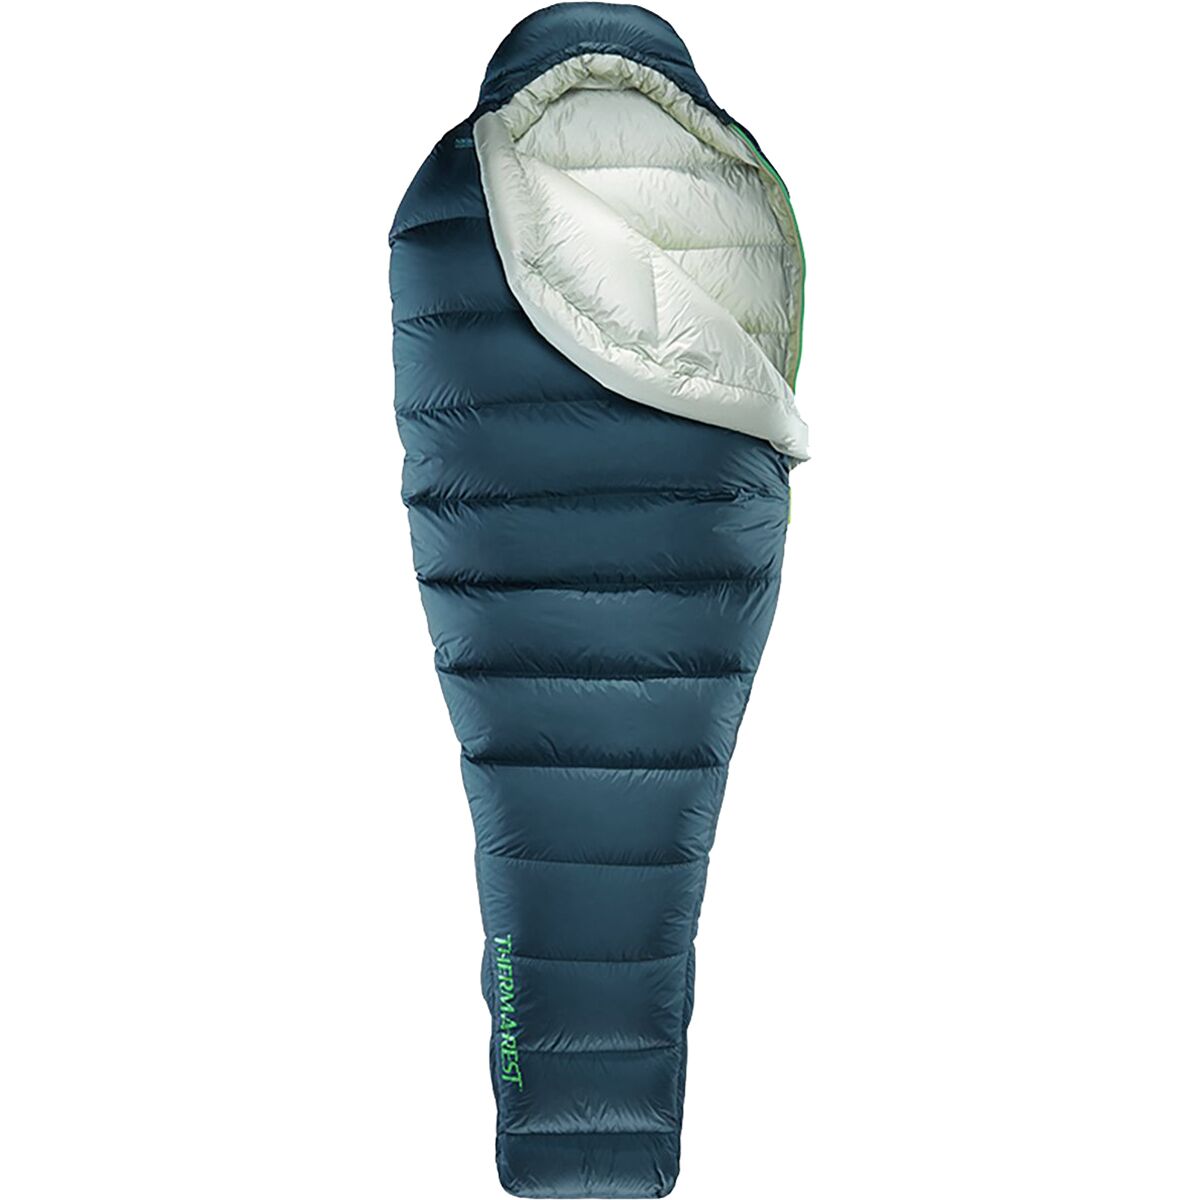 Therm-a-Rest Hyperion Sleeping Bag: 20F Down